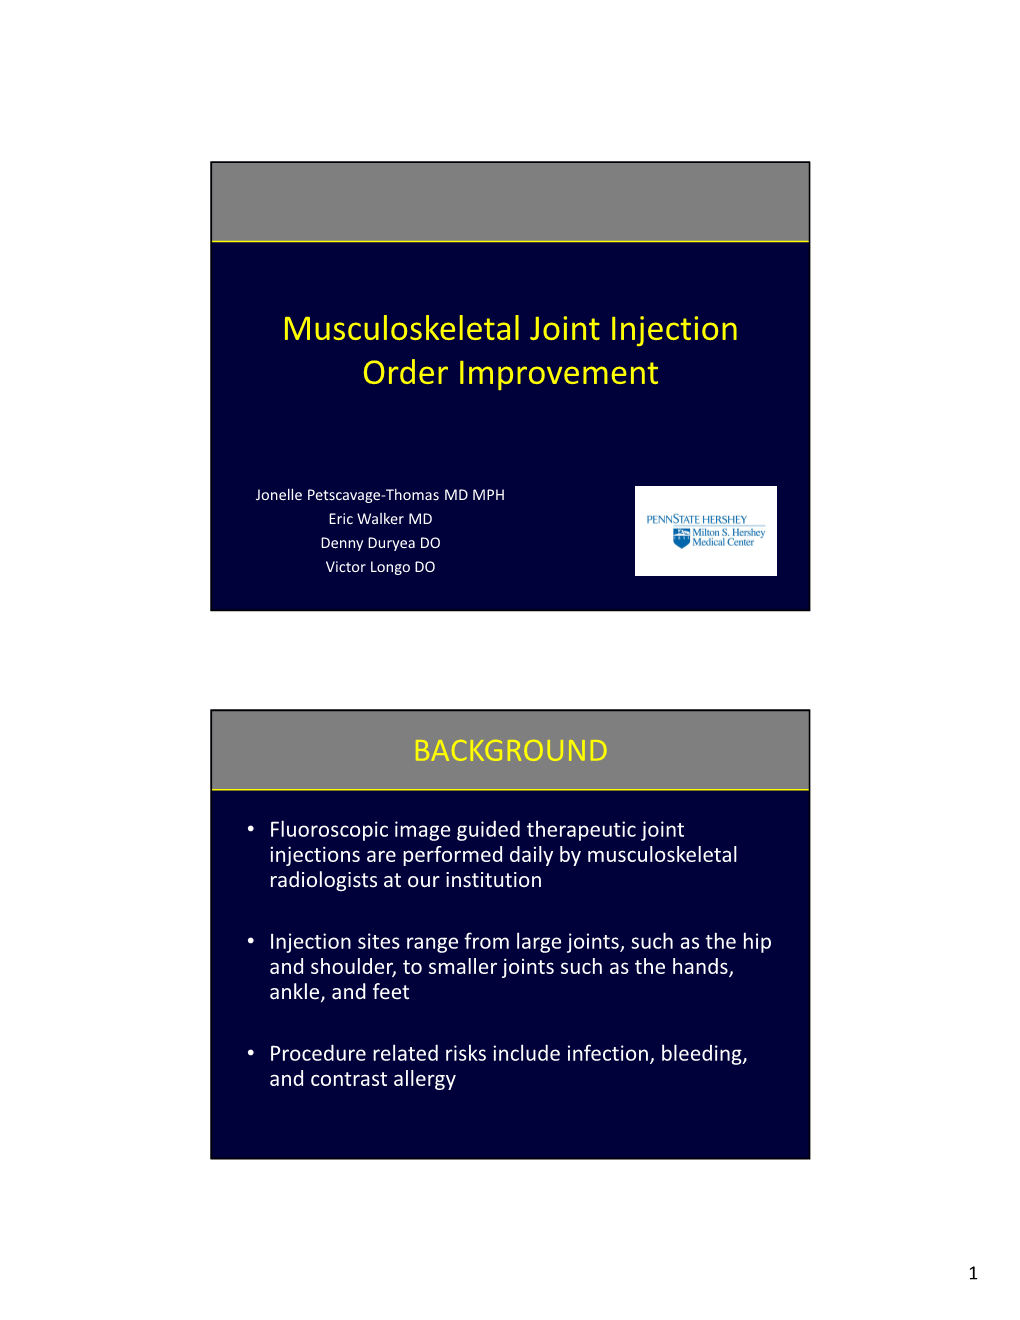 Musculoskeletal Joint Injection Order Improvement